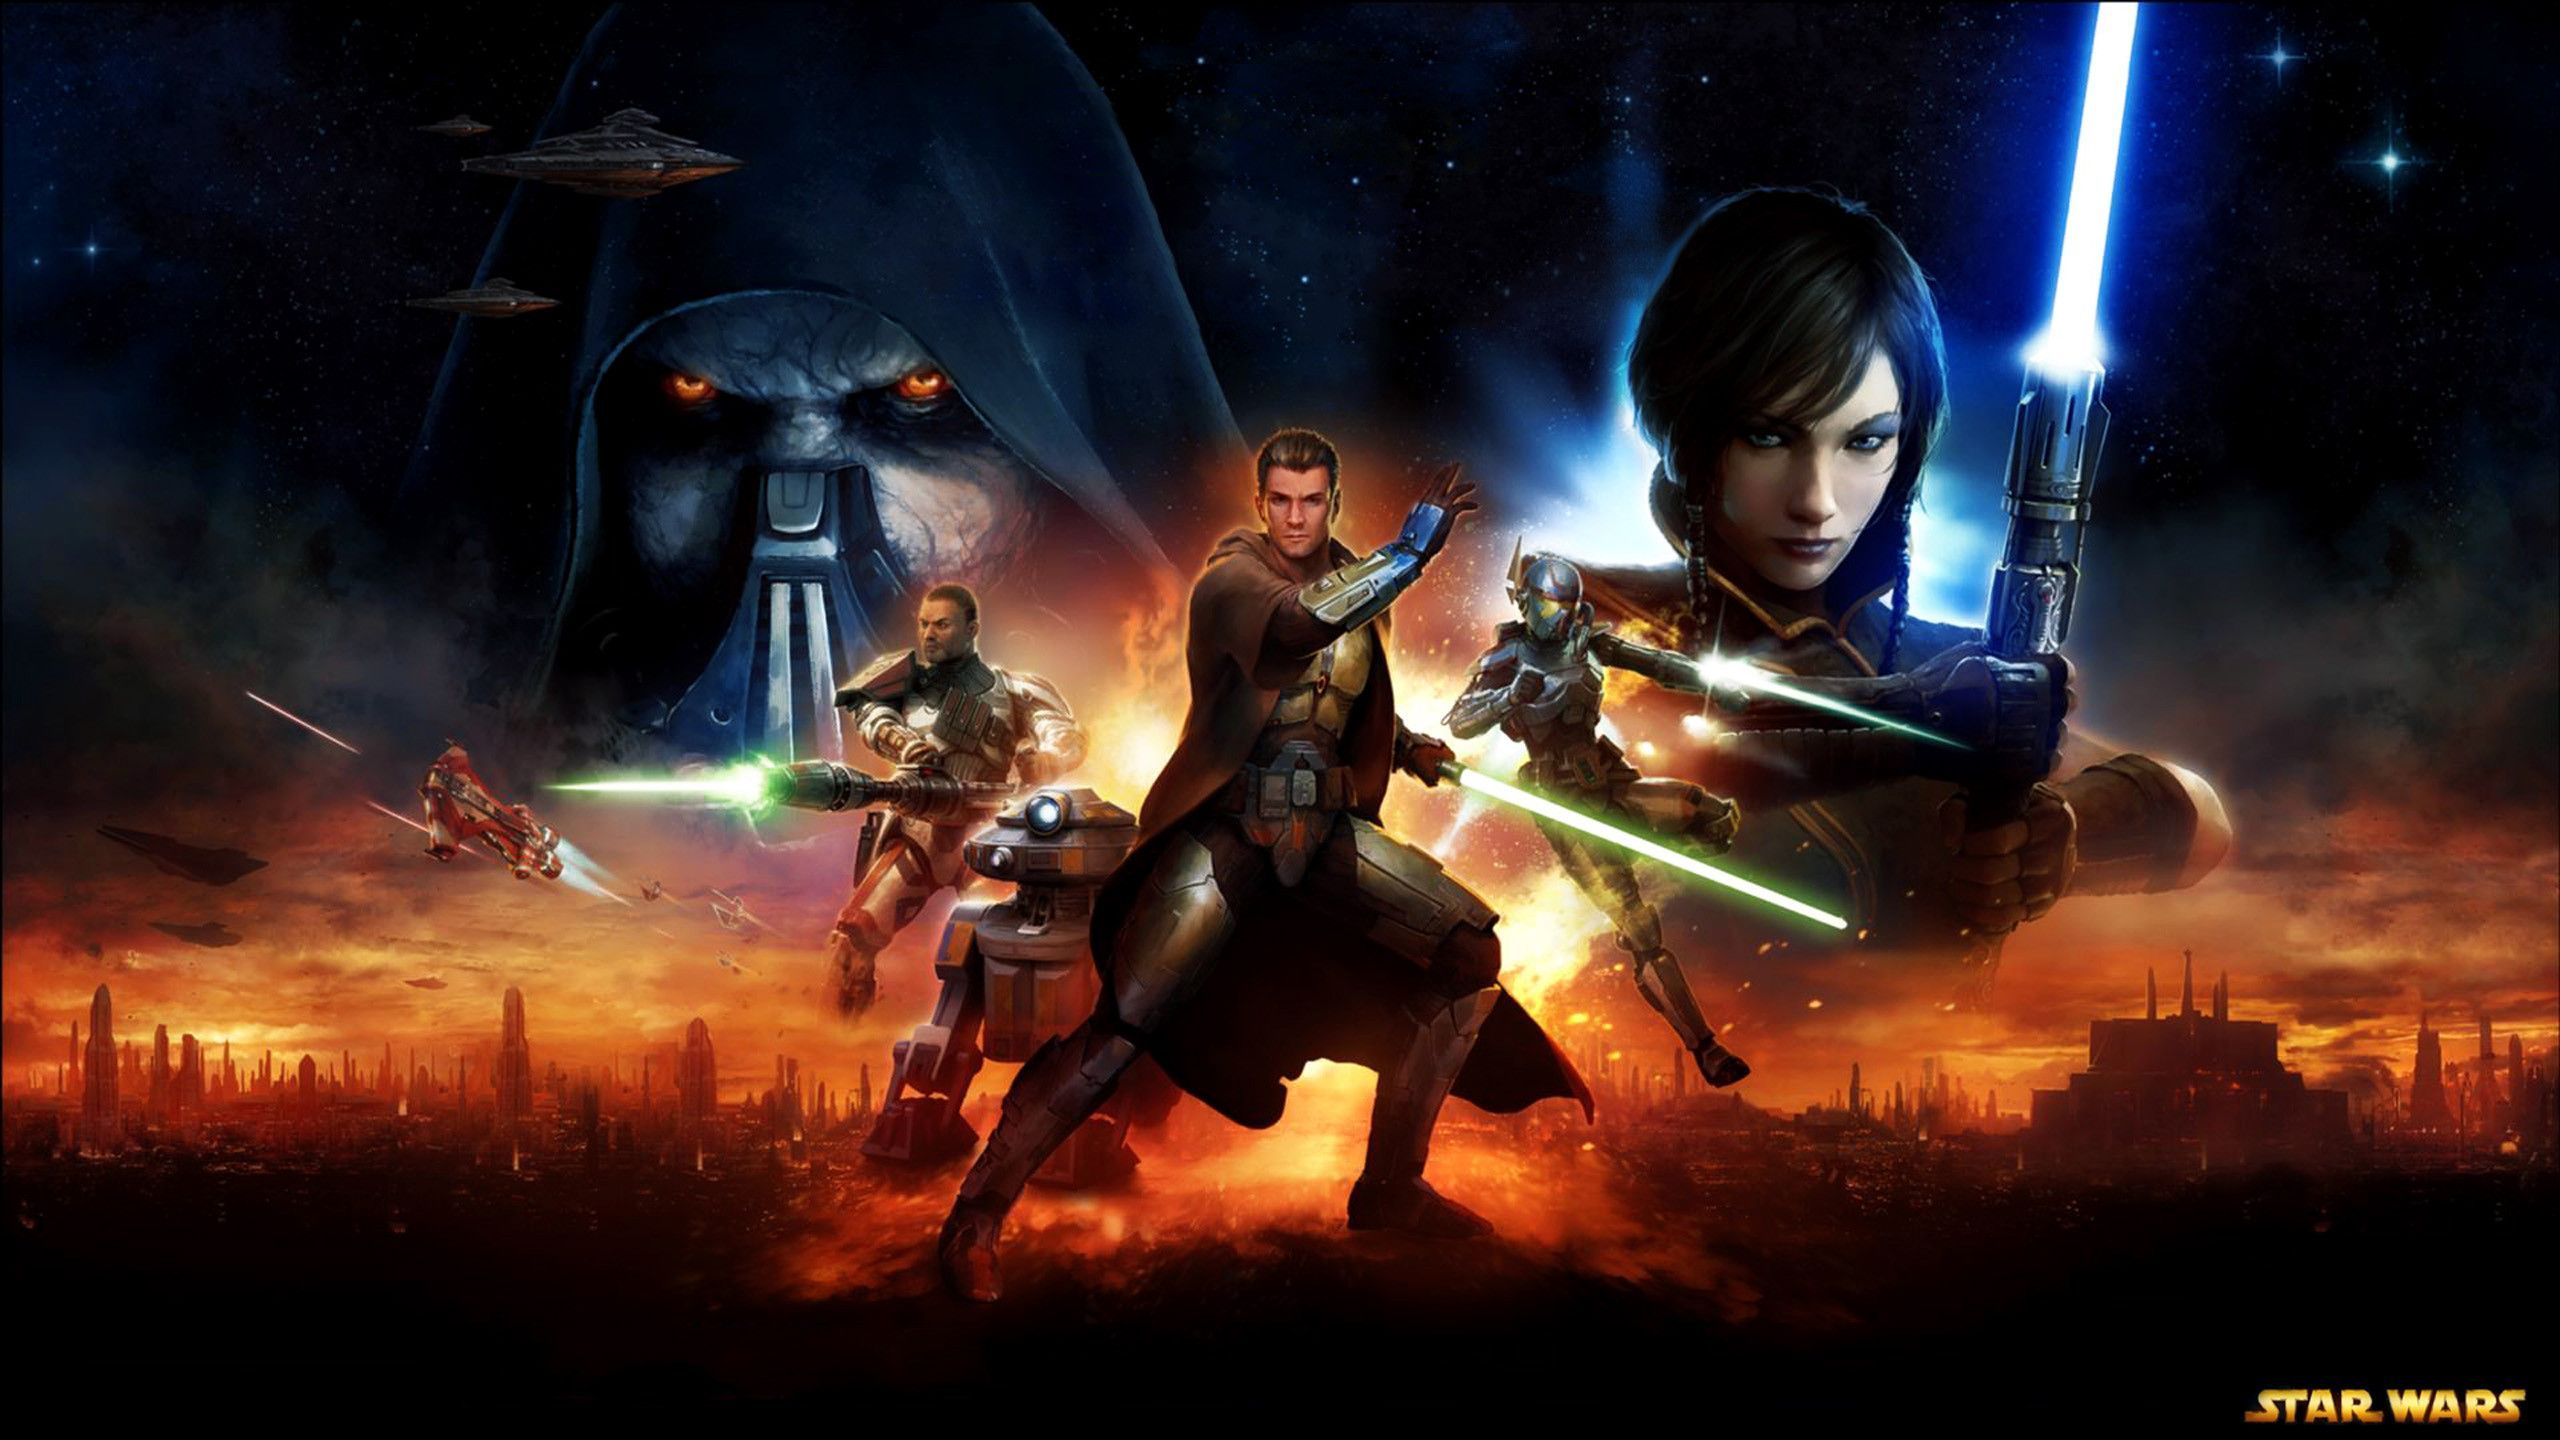 Knights Of The Old Republic Star Wars The Old Republic Background 2560x1440 Wallpaper Teahub Io